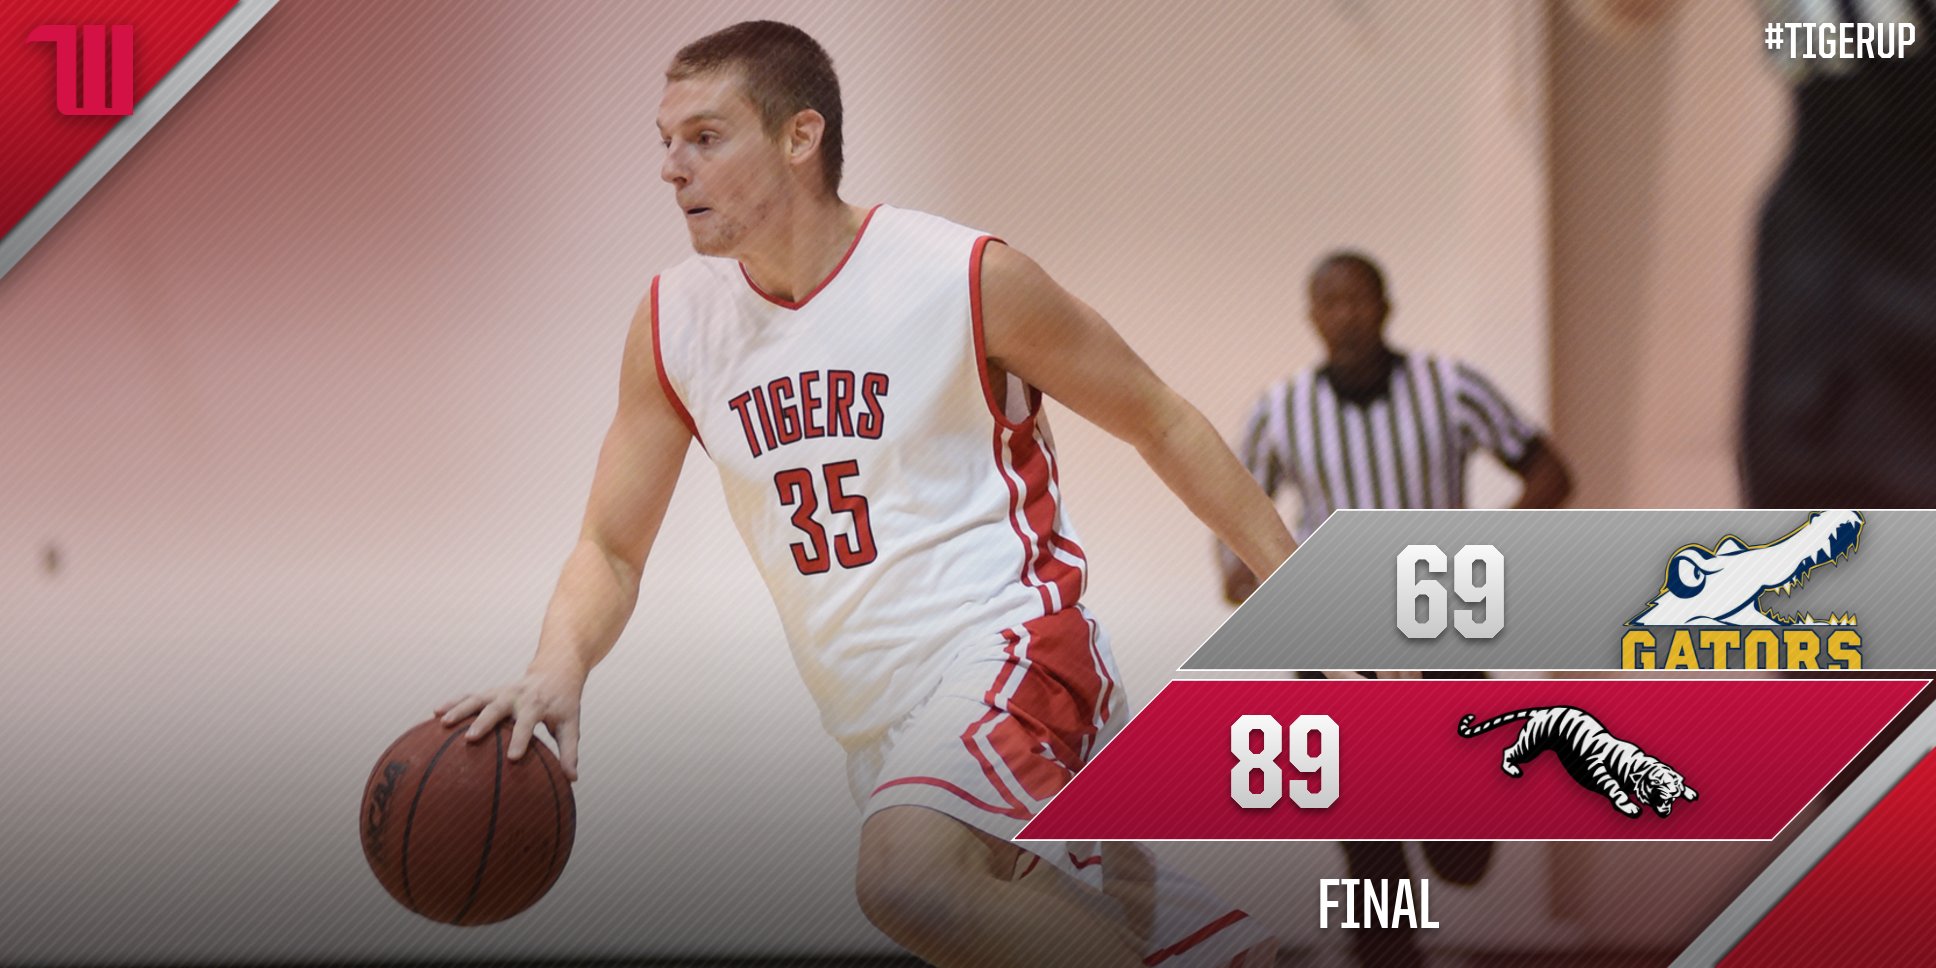 Tigers Open Up NCAC Play With 89-69 Drubbing of Allegheny